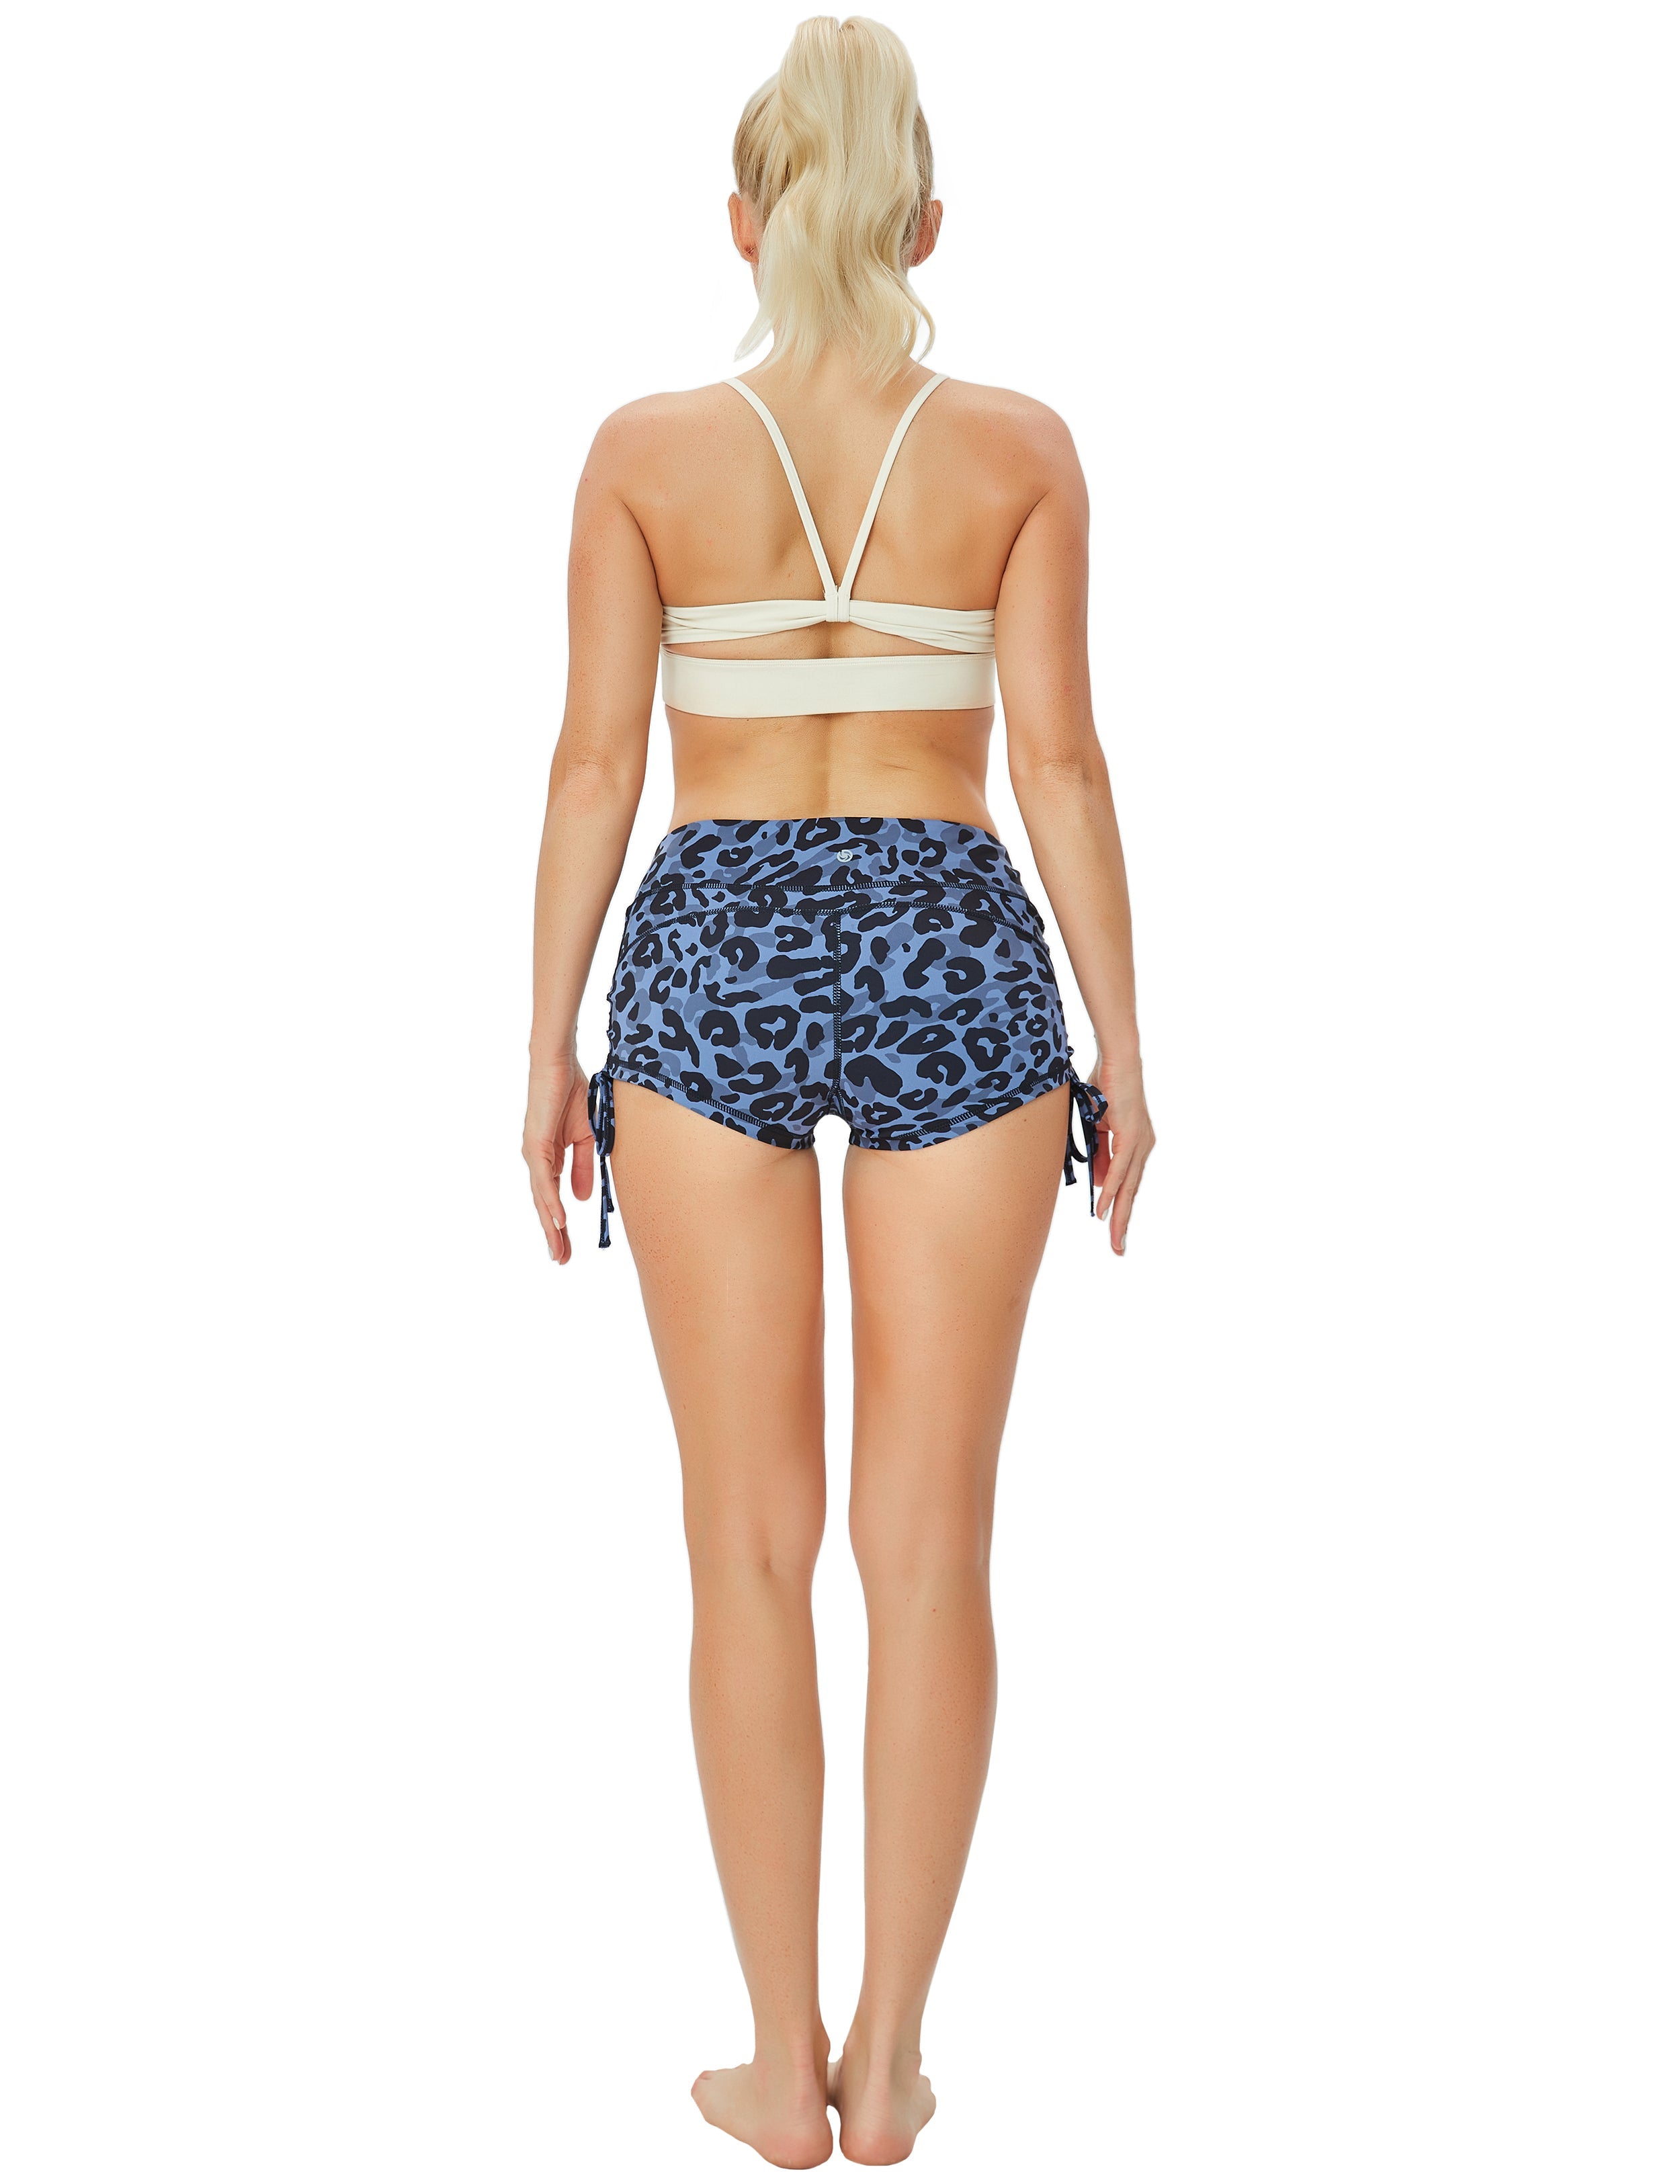 Printed Side Drawstring Hot Shorts navy_leopard Sleek, soft, smooth and totally comfortable: our newest sexy style is here. Softest-ever fabric High elasticity High density 4-way stretch Fabric doesn't attract lint easily No see-through Moisture-wicking Machine wash 78% Polyester, 22% Spandex